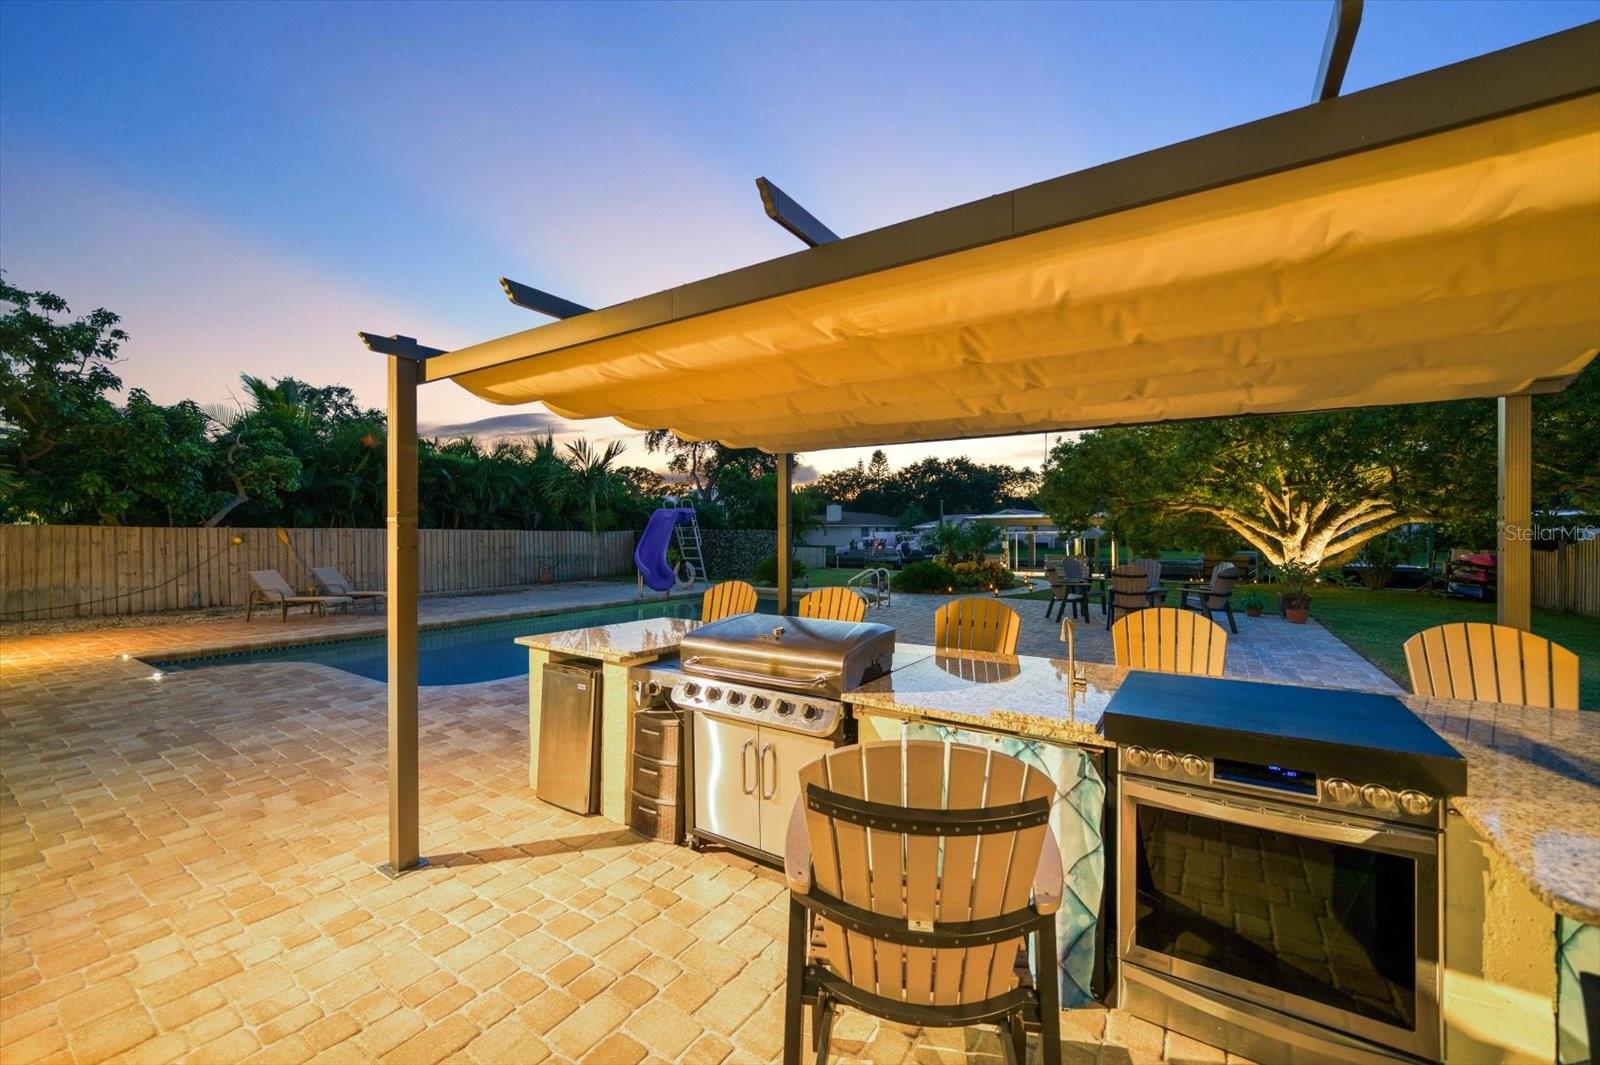 Exceptional outdoor kitchen with sink, stove, range grill and refrigeration. Extensive bar for entertaining in style.